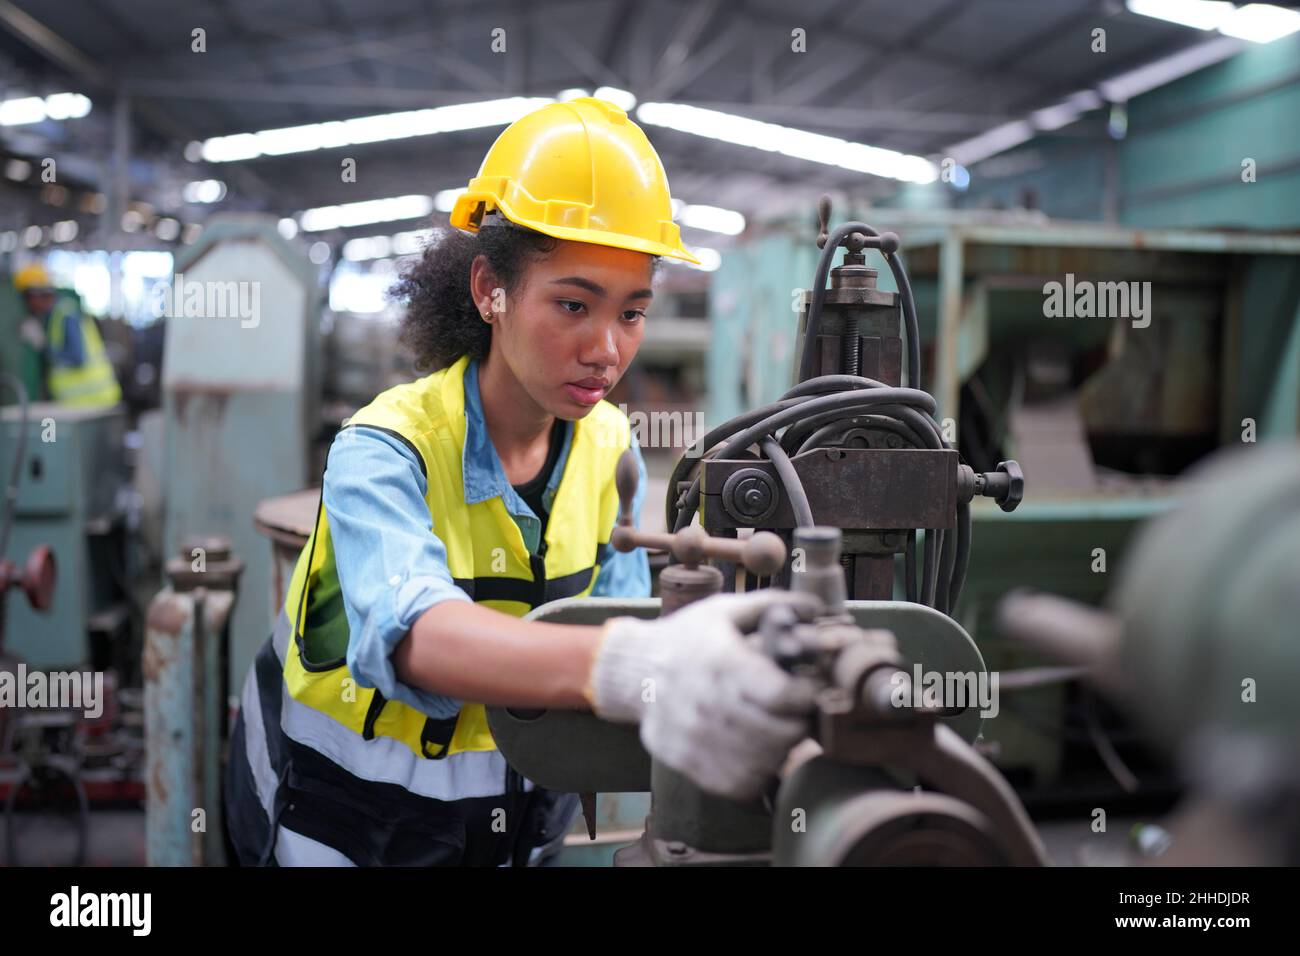 Female apprentice in metal working factory, Portrait of working female industry technical worker or engineer woman working in an industrial manufactur Stock Photo